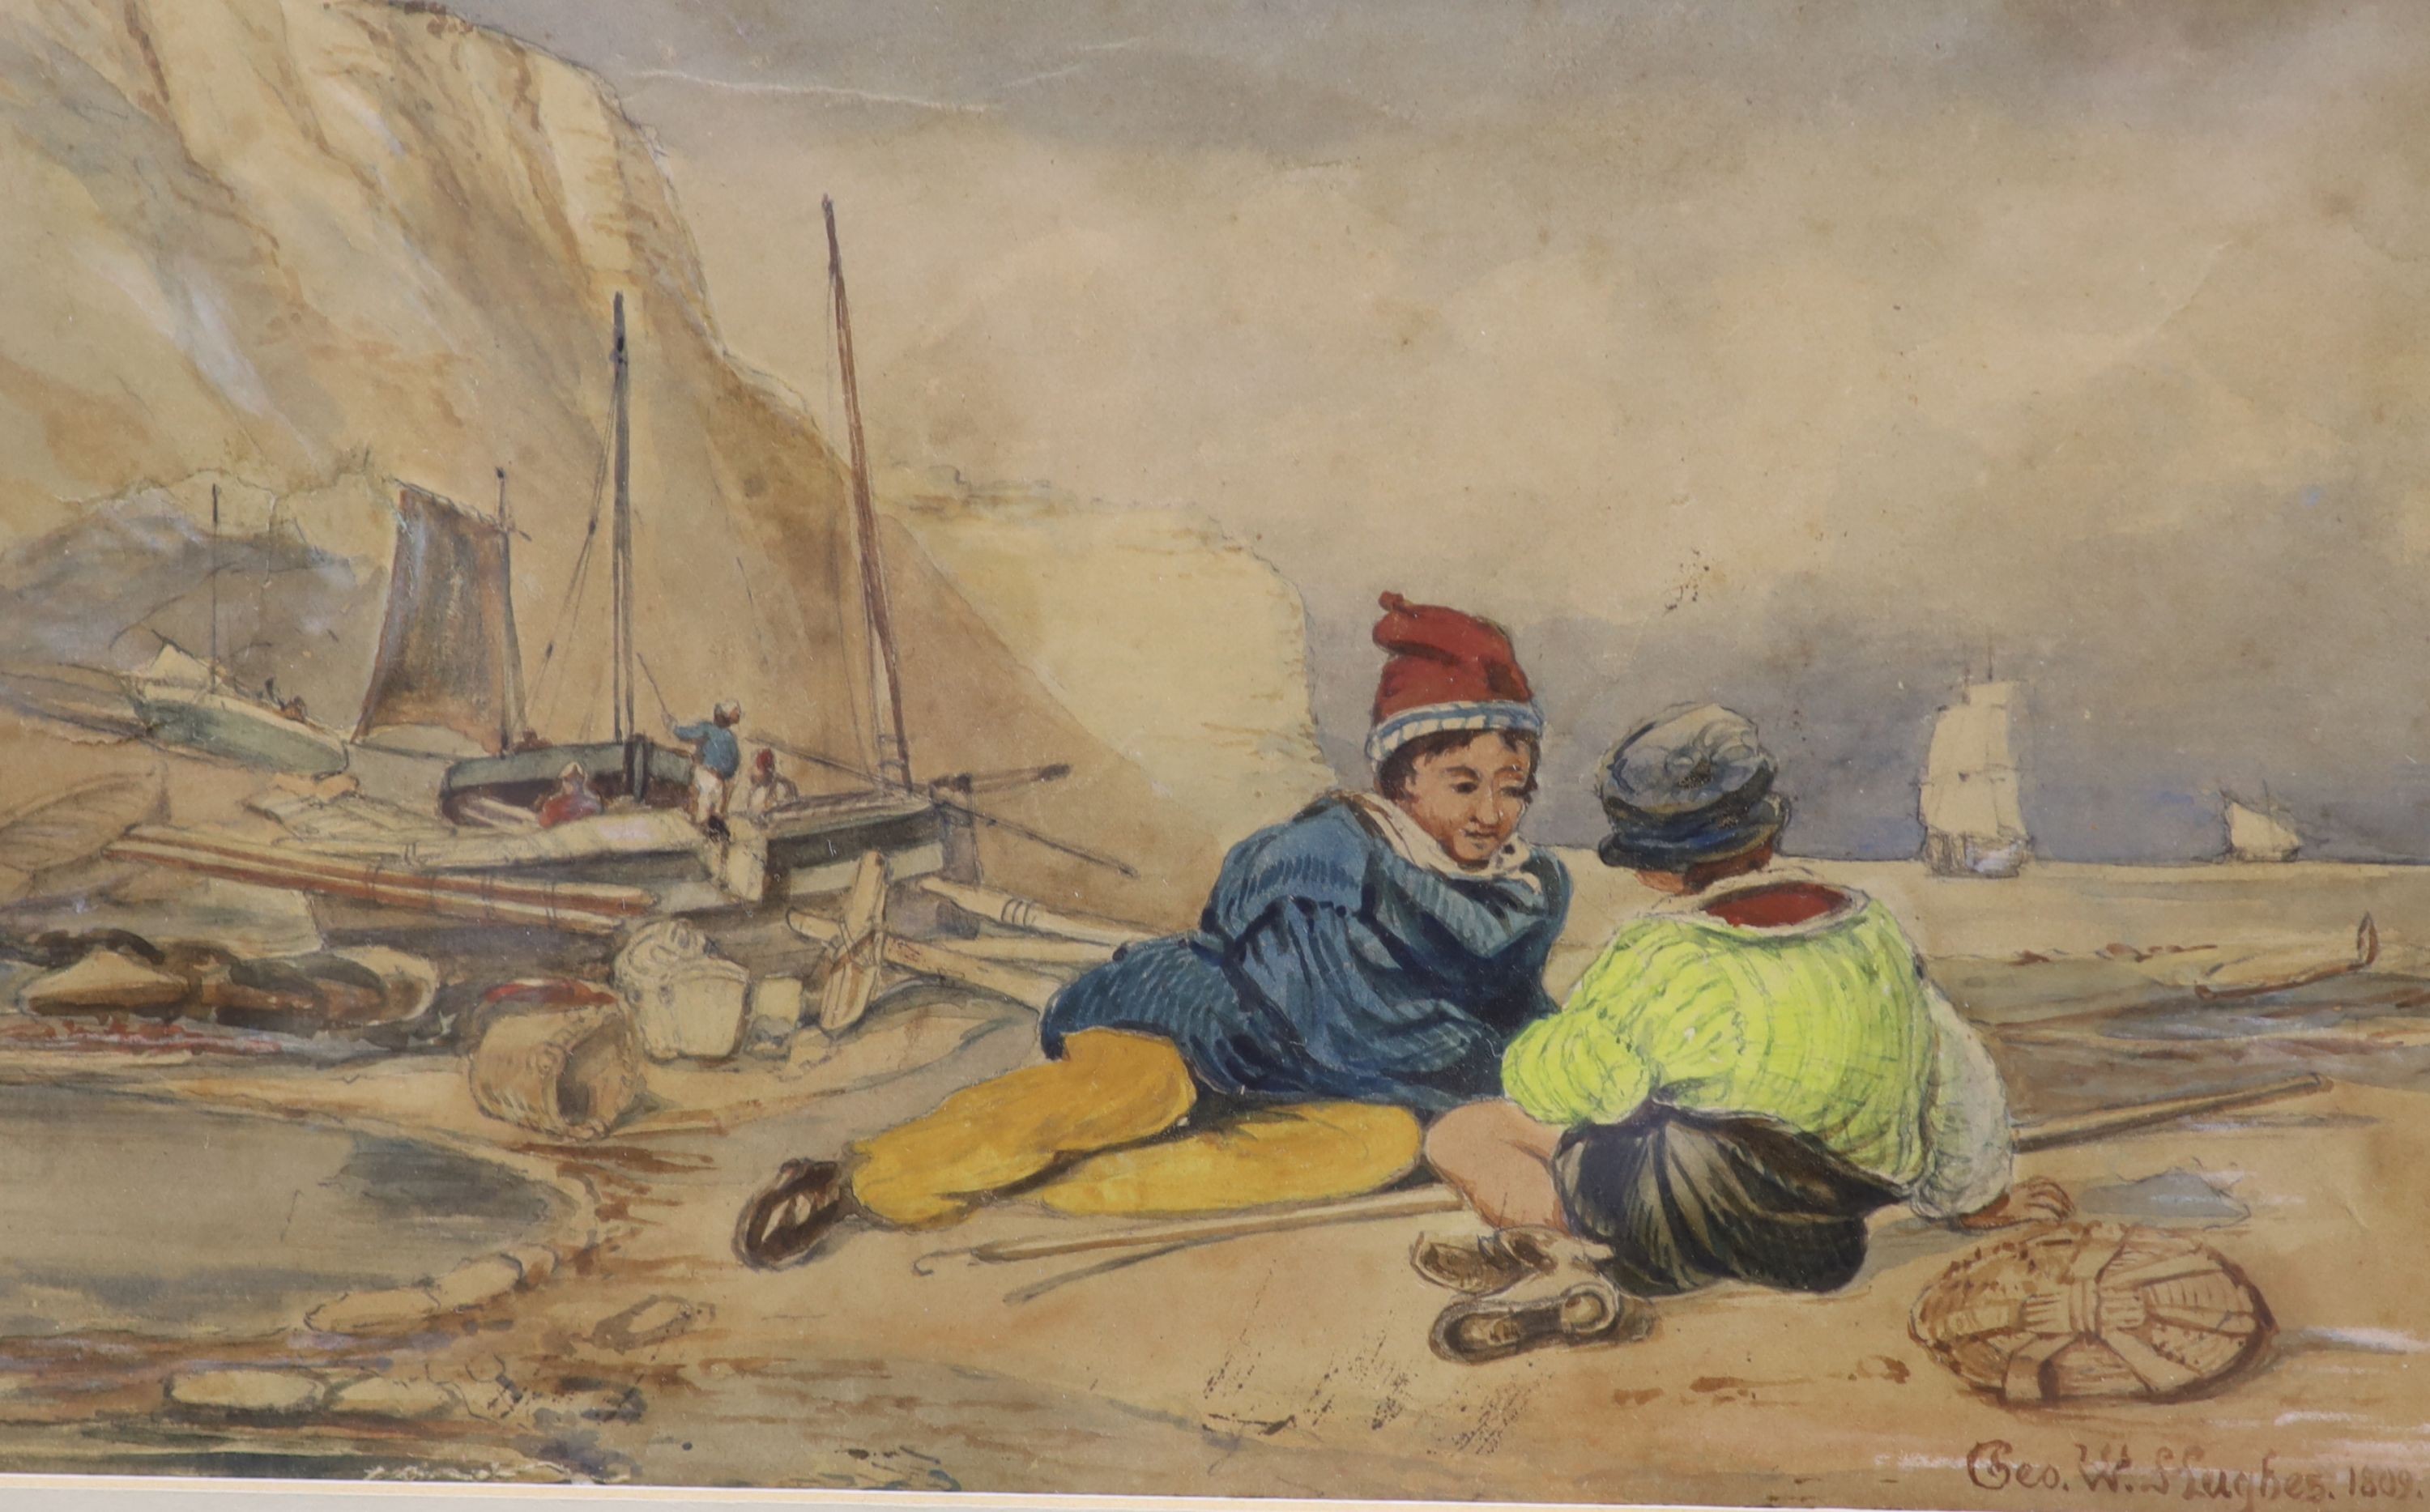 George W. Hughes (fl.1813-58), watercolour, Fisherboys on the shore, signed and dated 1809, 15 x 25cm